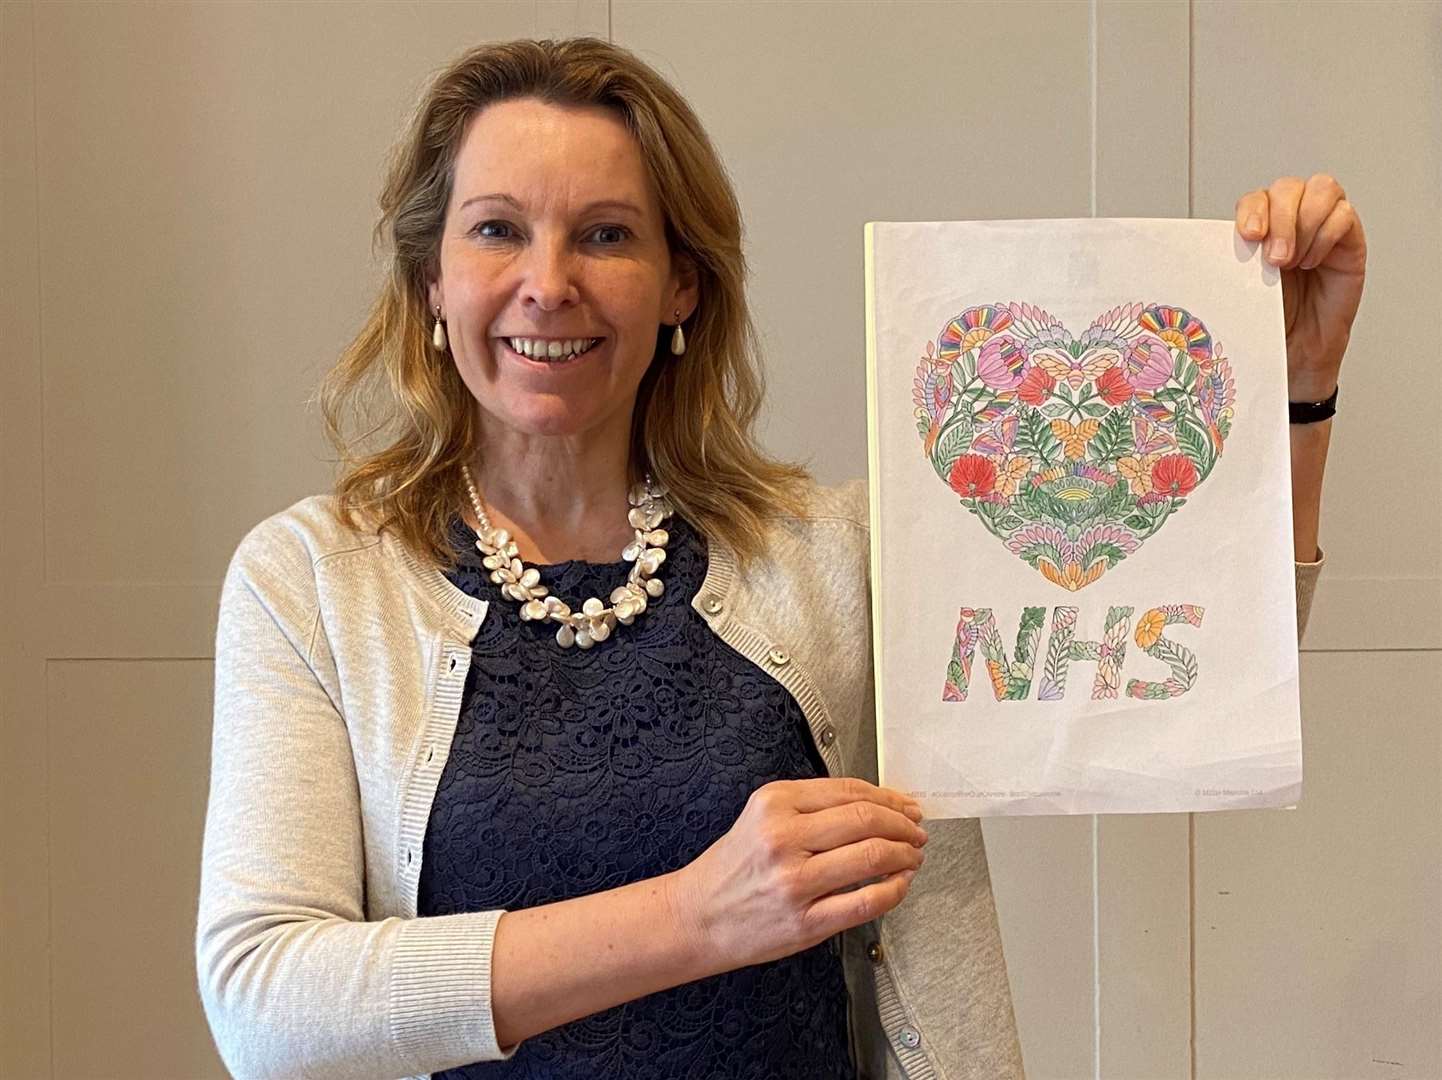 MP Natalie Elphicke is asking children to draw messages of support for the NHS